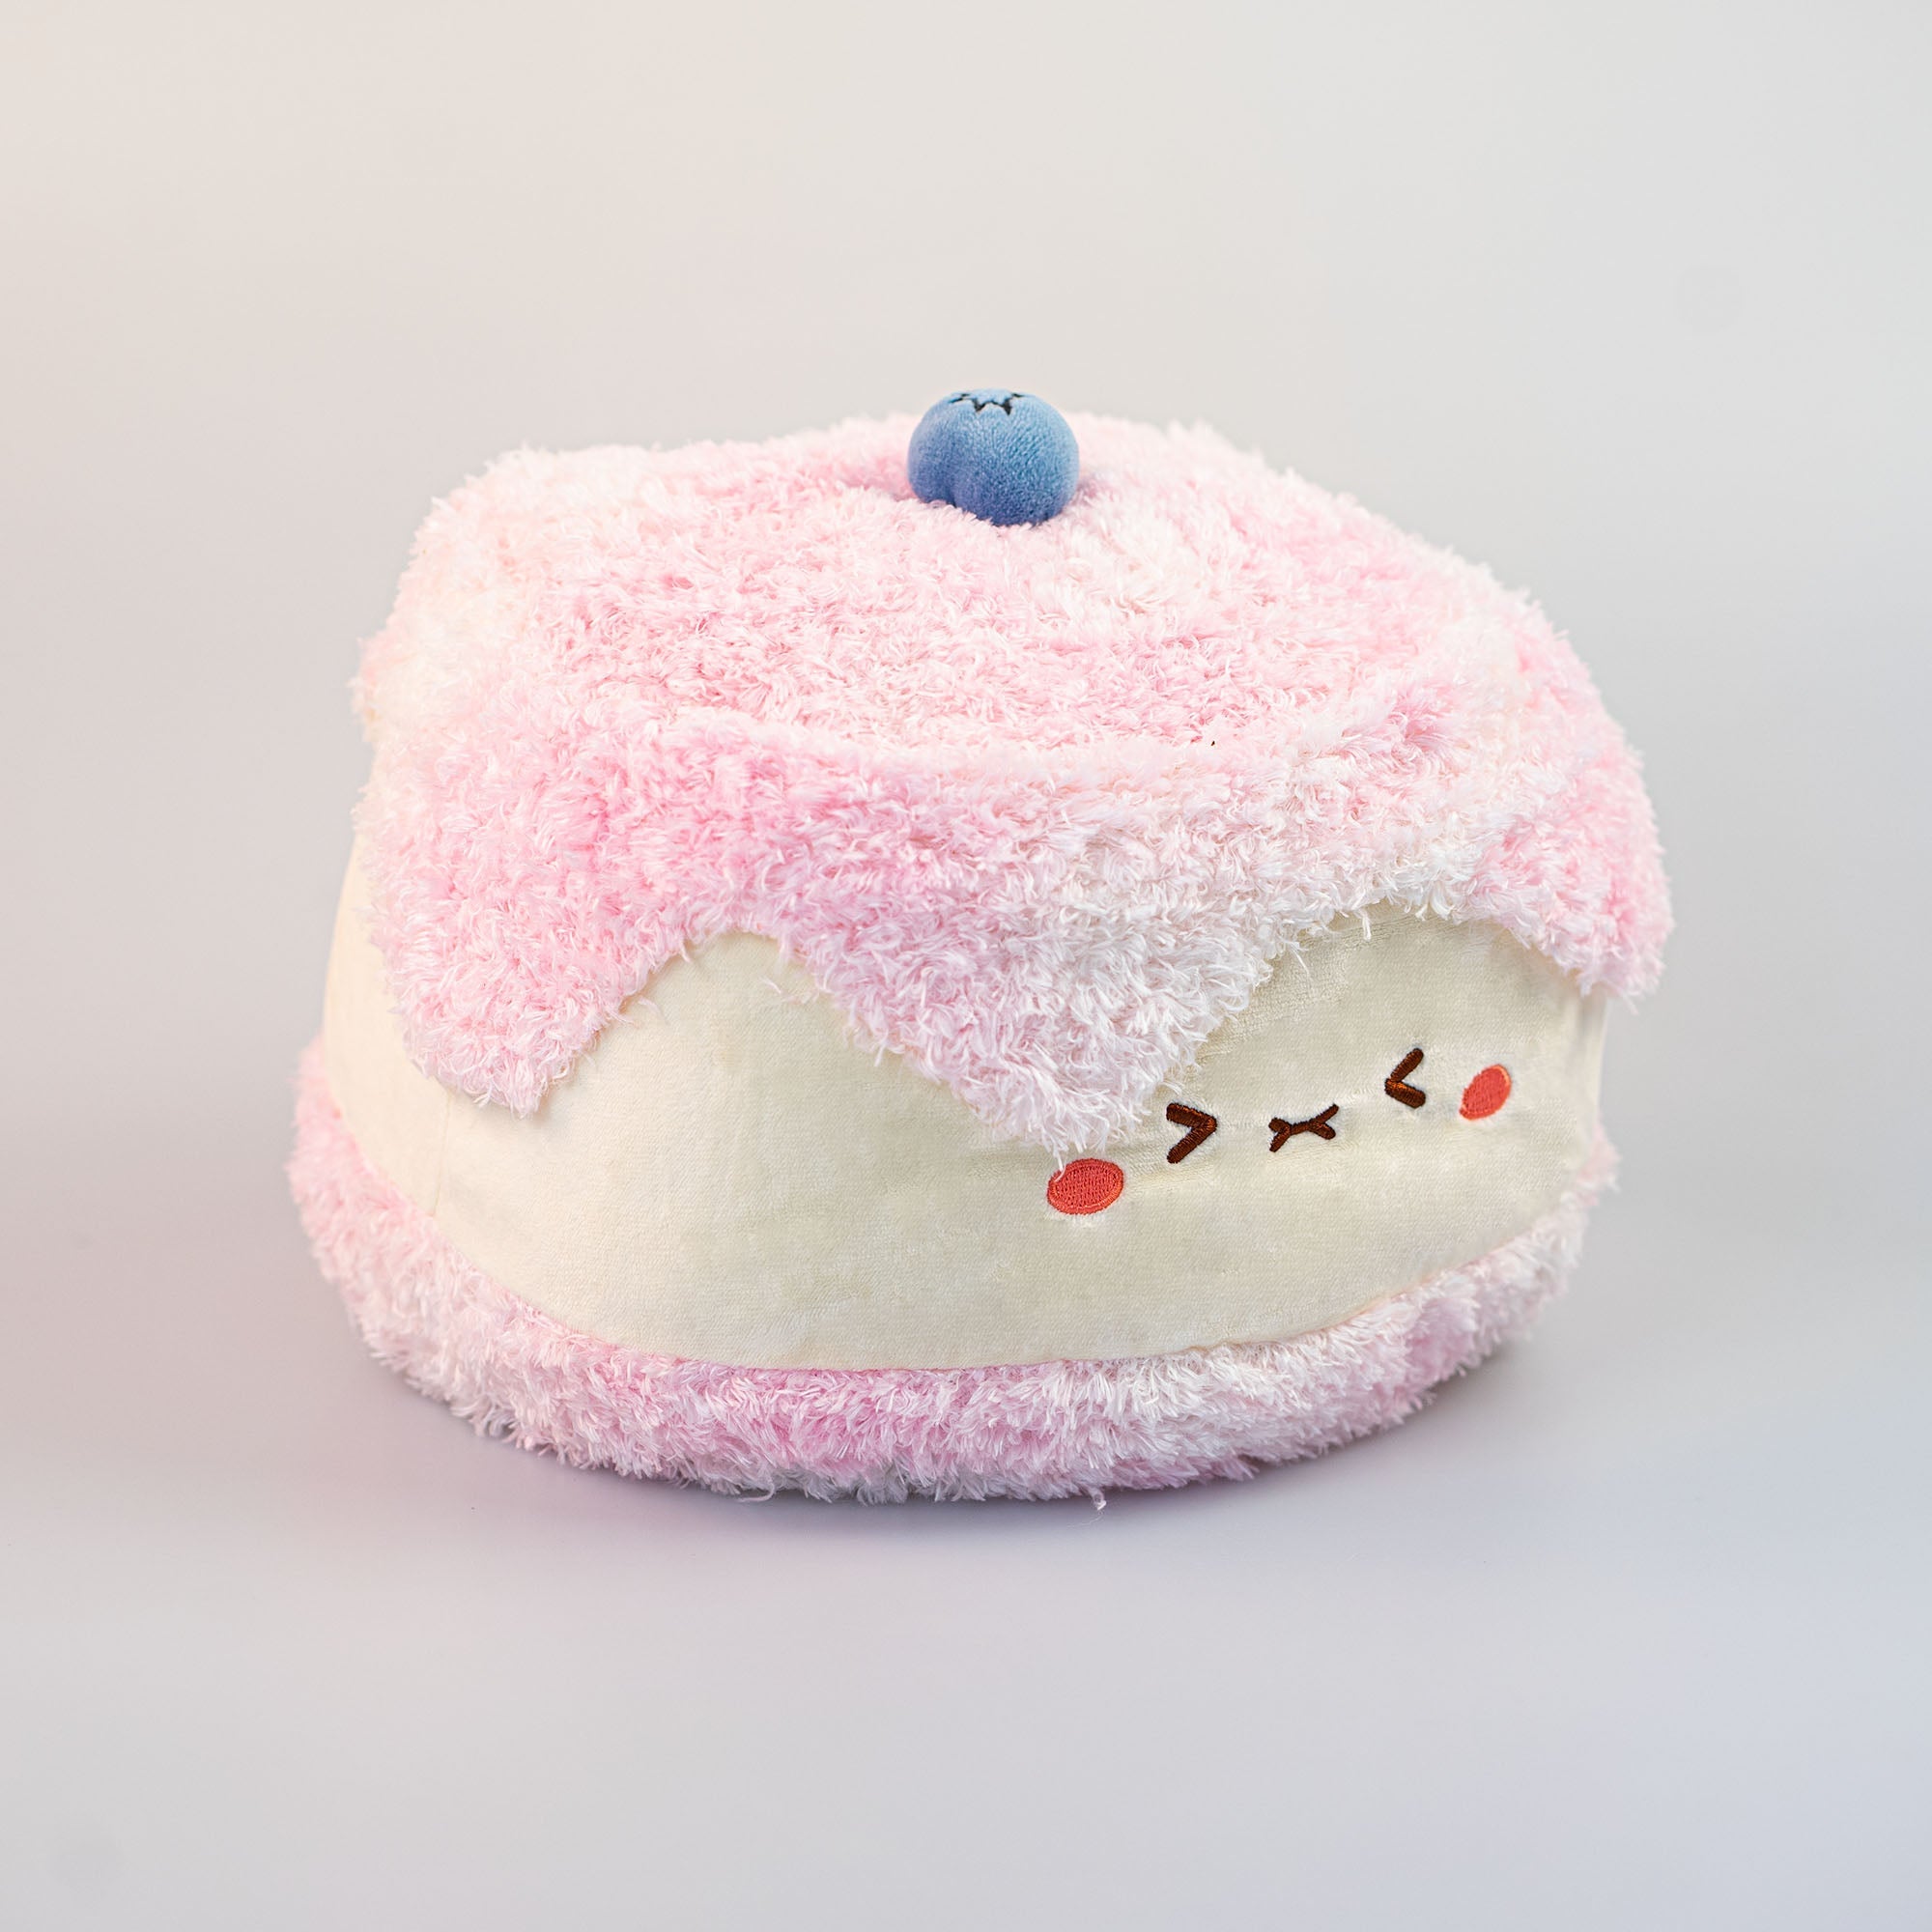 MINISO DESSERT SERIES 10IN. BIG PUDDING PLUSH TOY ( PINK ) 2014465210100 TOY SERIES